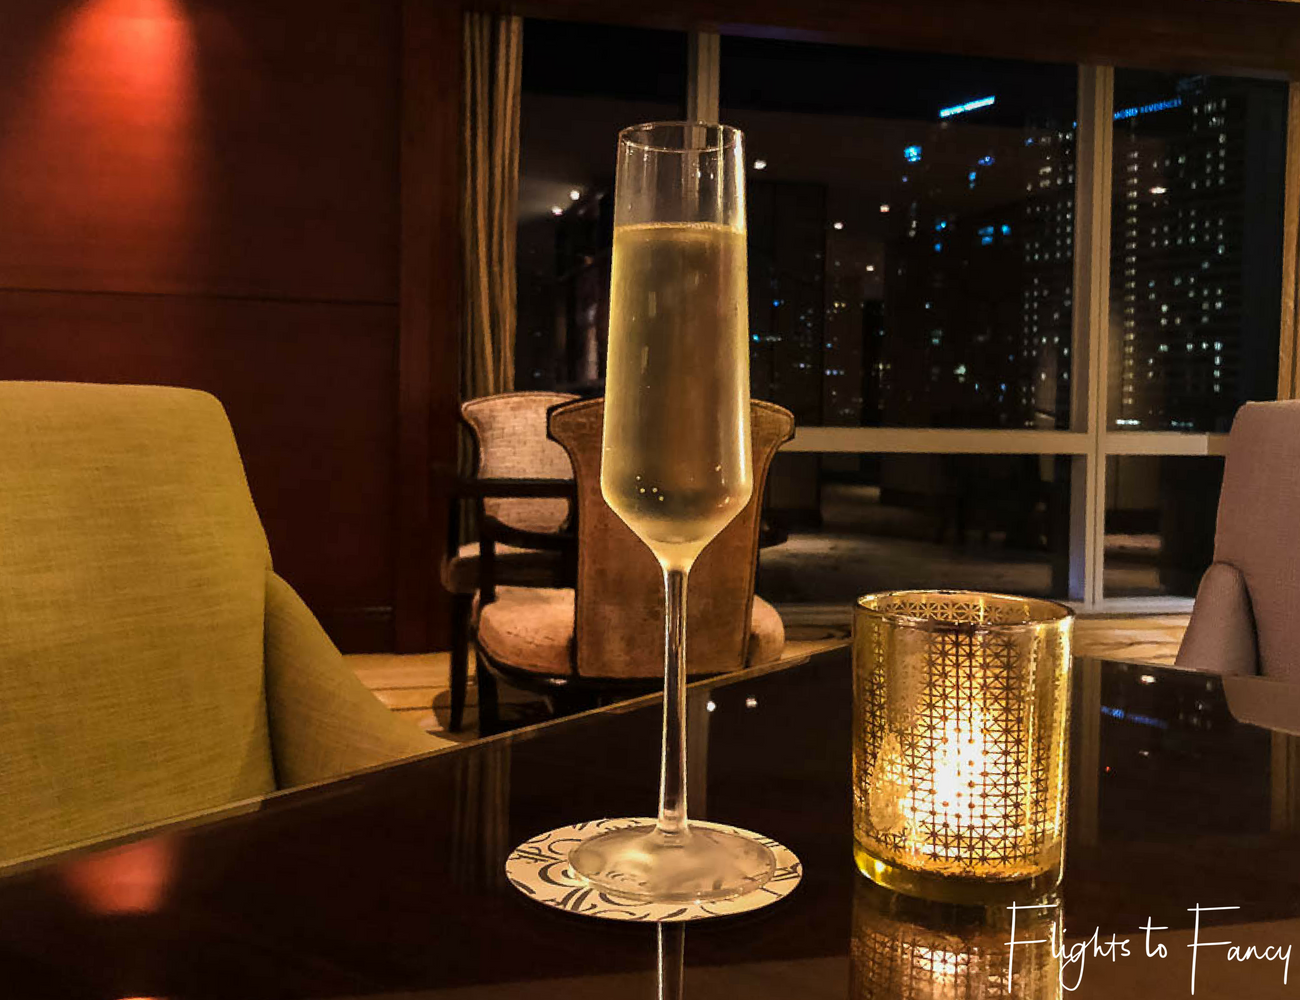 Flights to Fancy - Fairmont Makati Prosecco in Gold Lounge